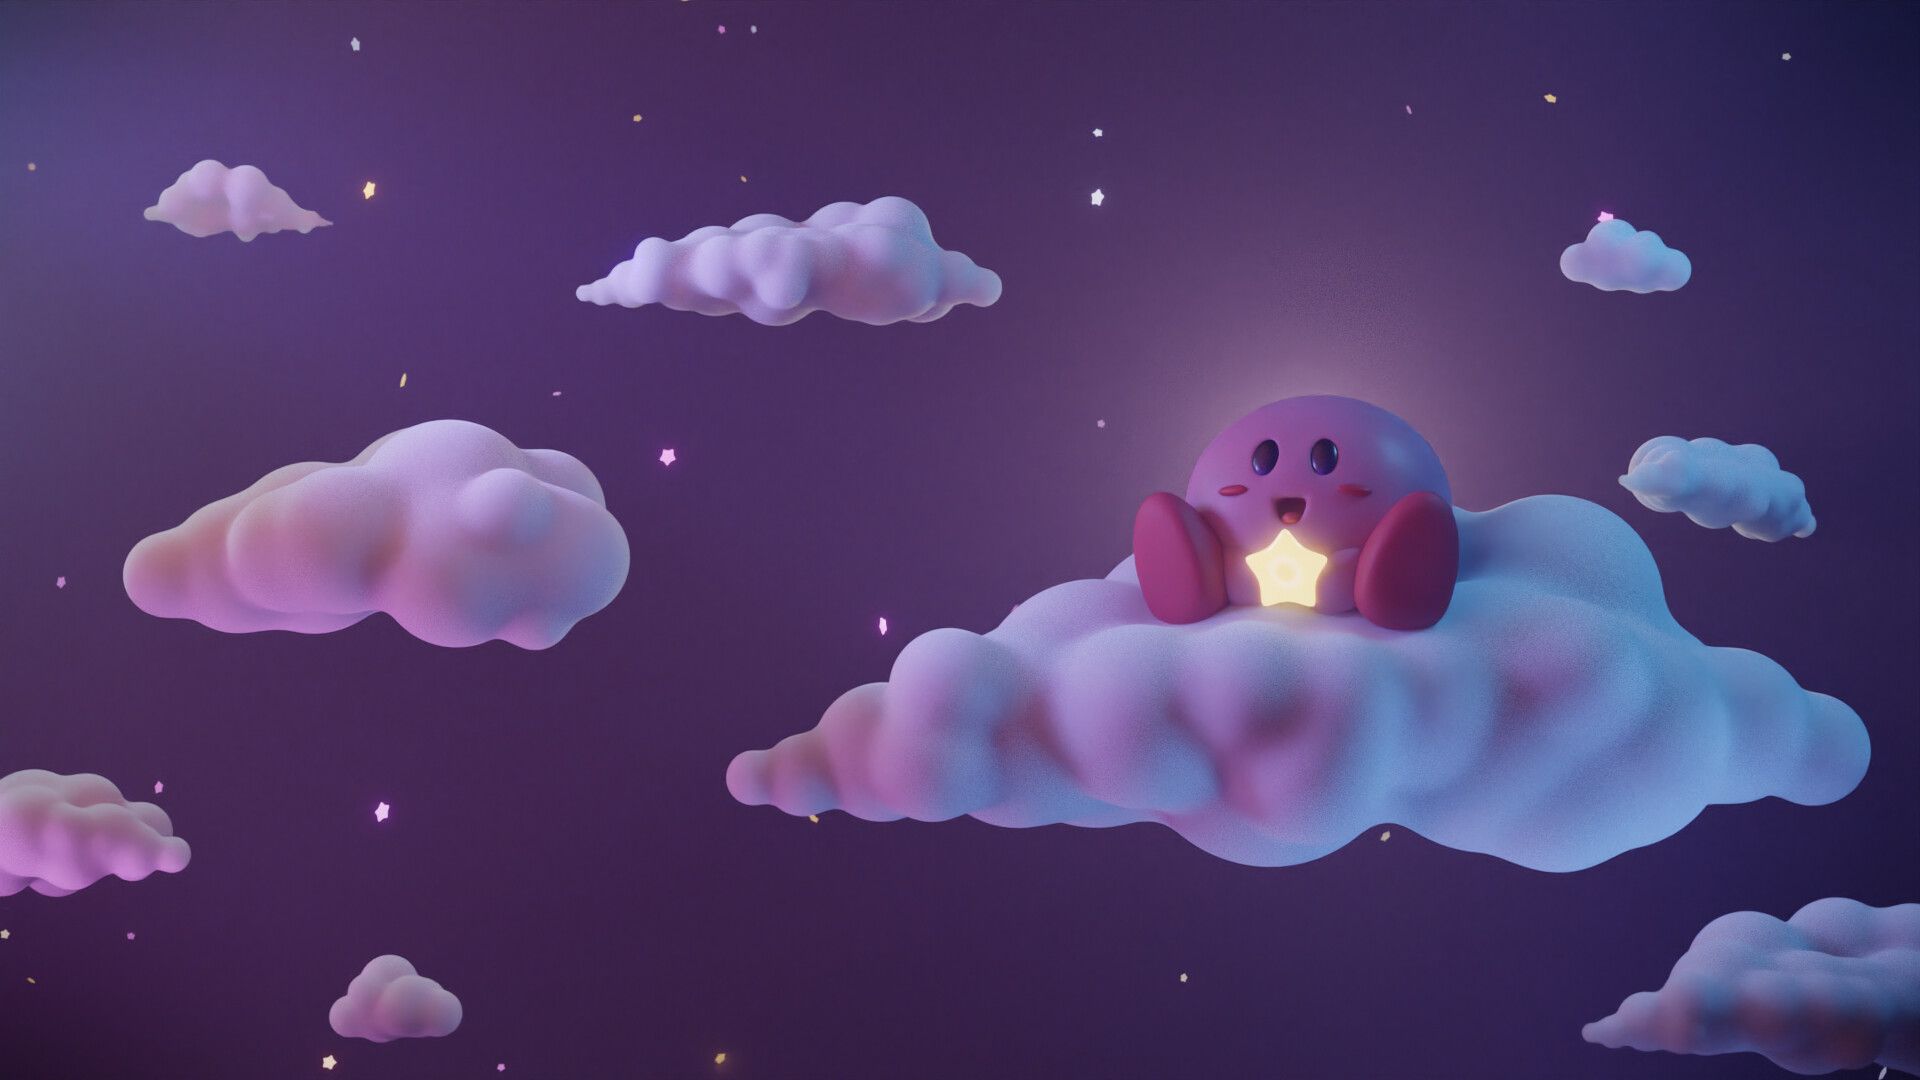 Kirby in the clouds